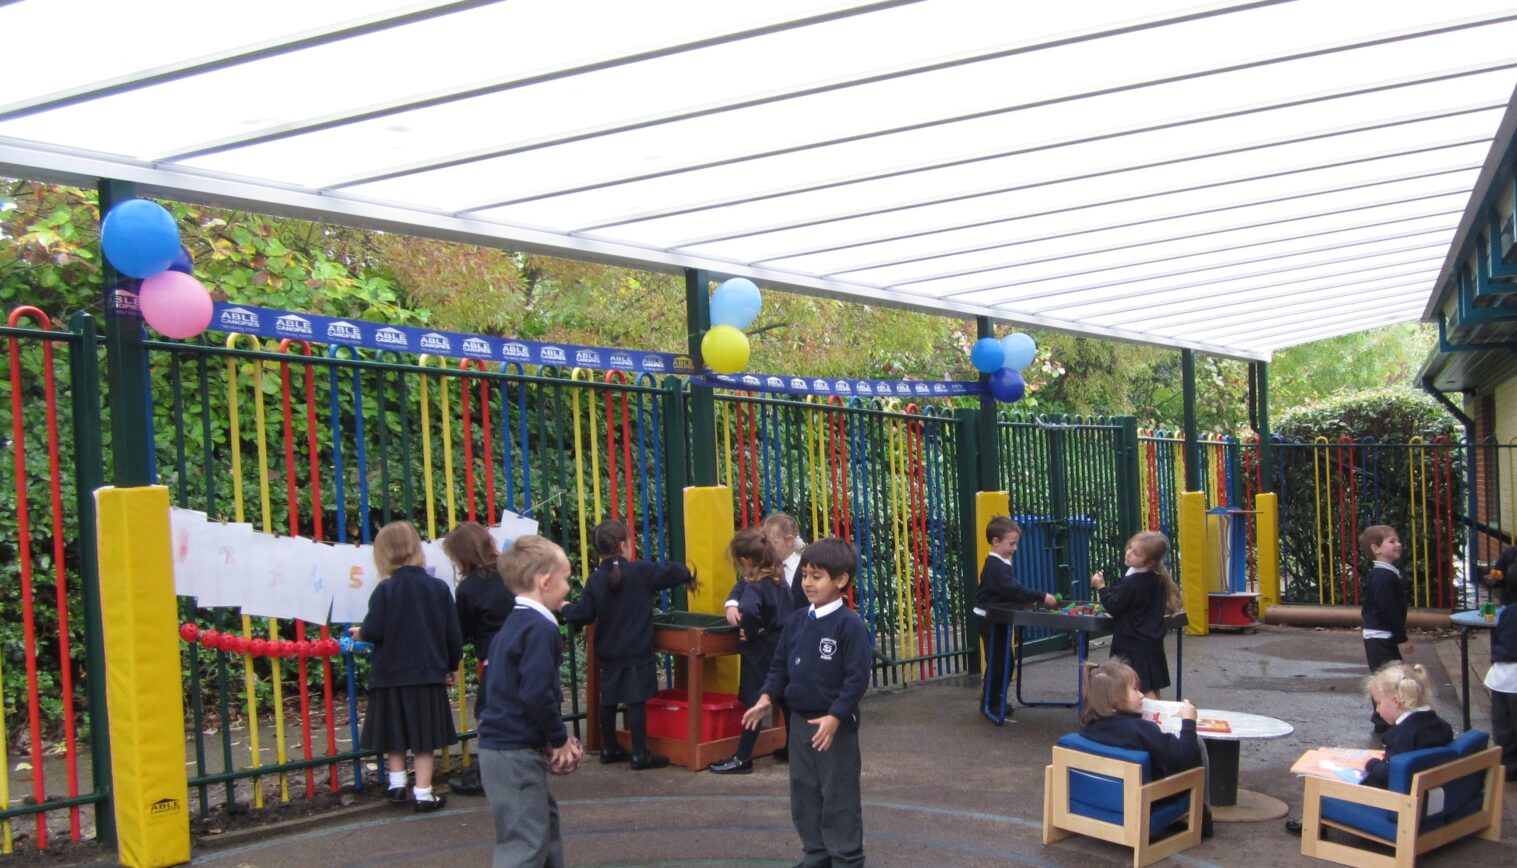 Children at Ladbrooke School enjoy learning outside whatever the weather!